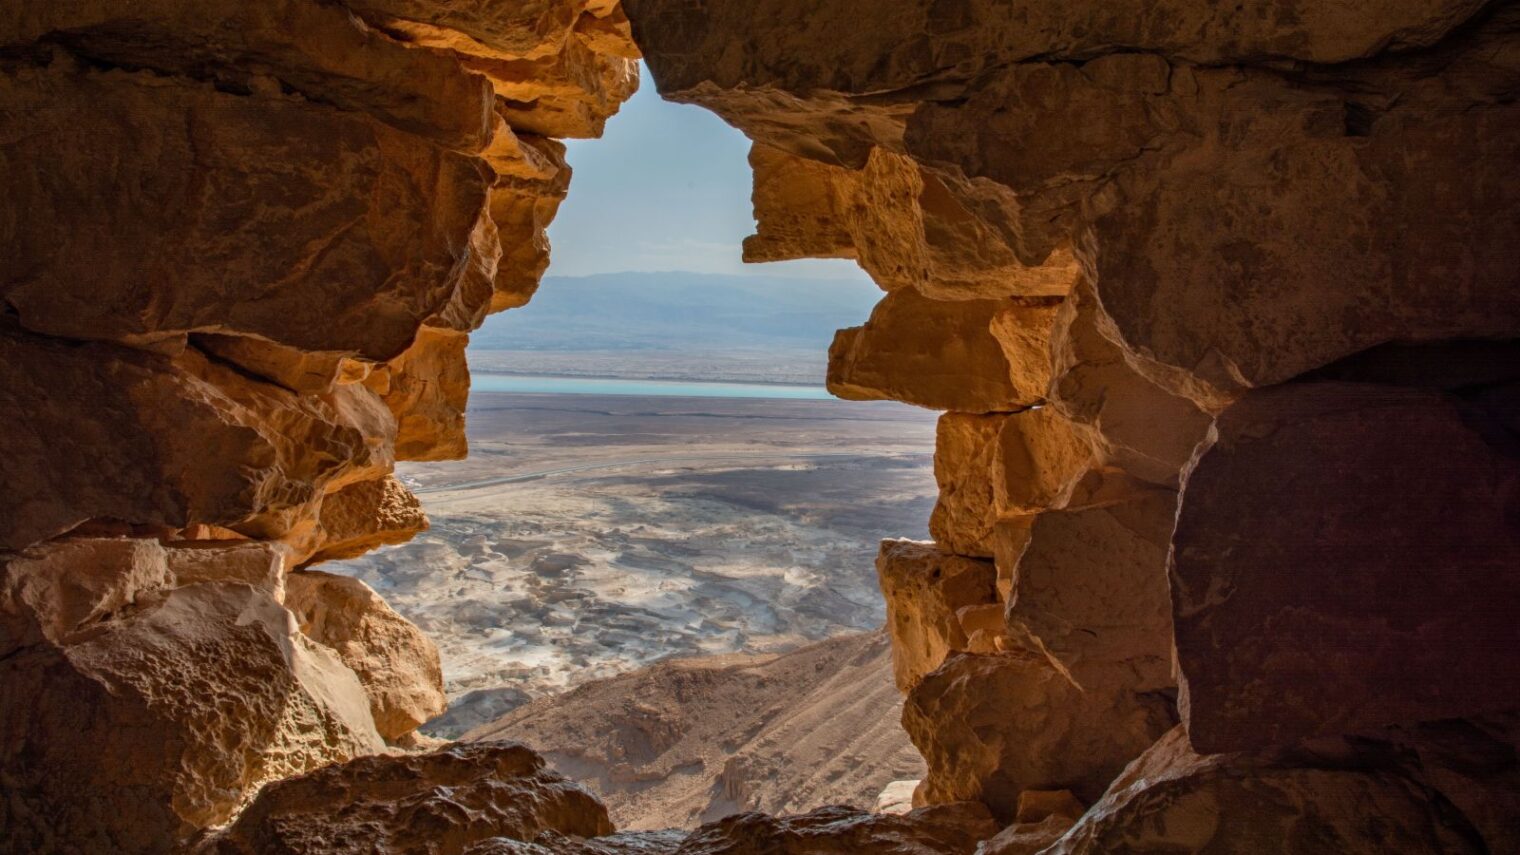 View from Masada National Park near the Dead Sea. Virtual tourism includes all the views, minus the hikes. Photo by Mila Aviv/Flash90